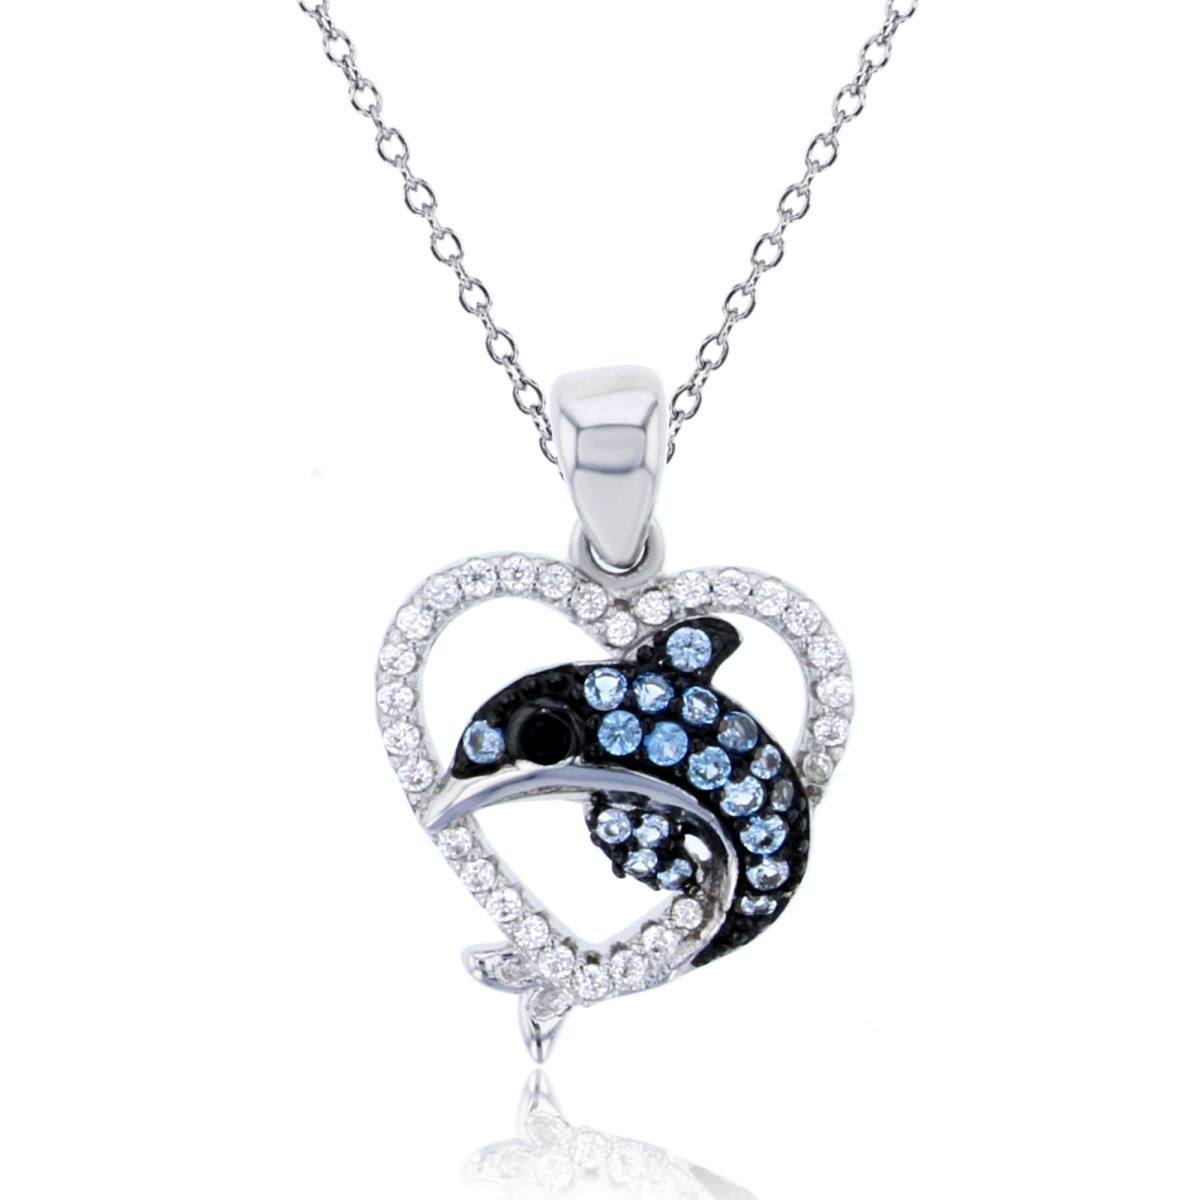 Sterling Silver Two-Tone Rnd Blue/White/Black CZ Dolhpin in Open Heart 18"Necklace